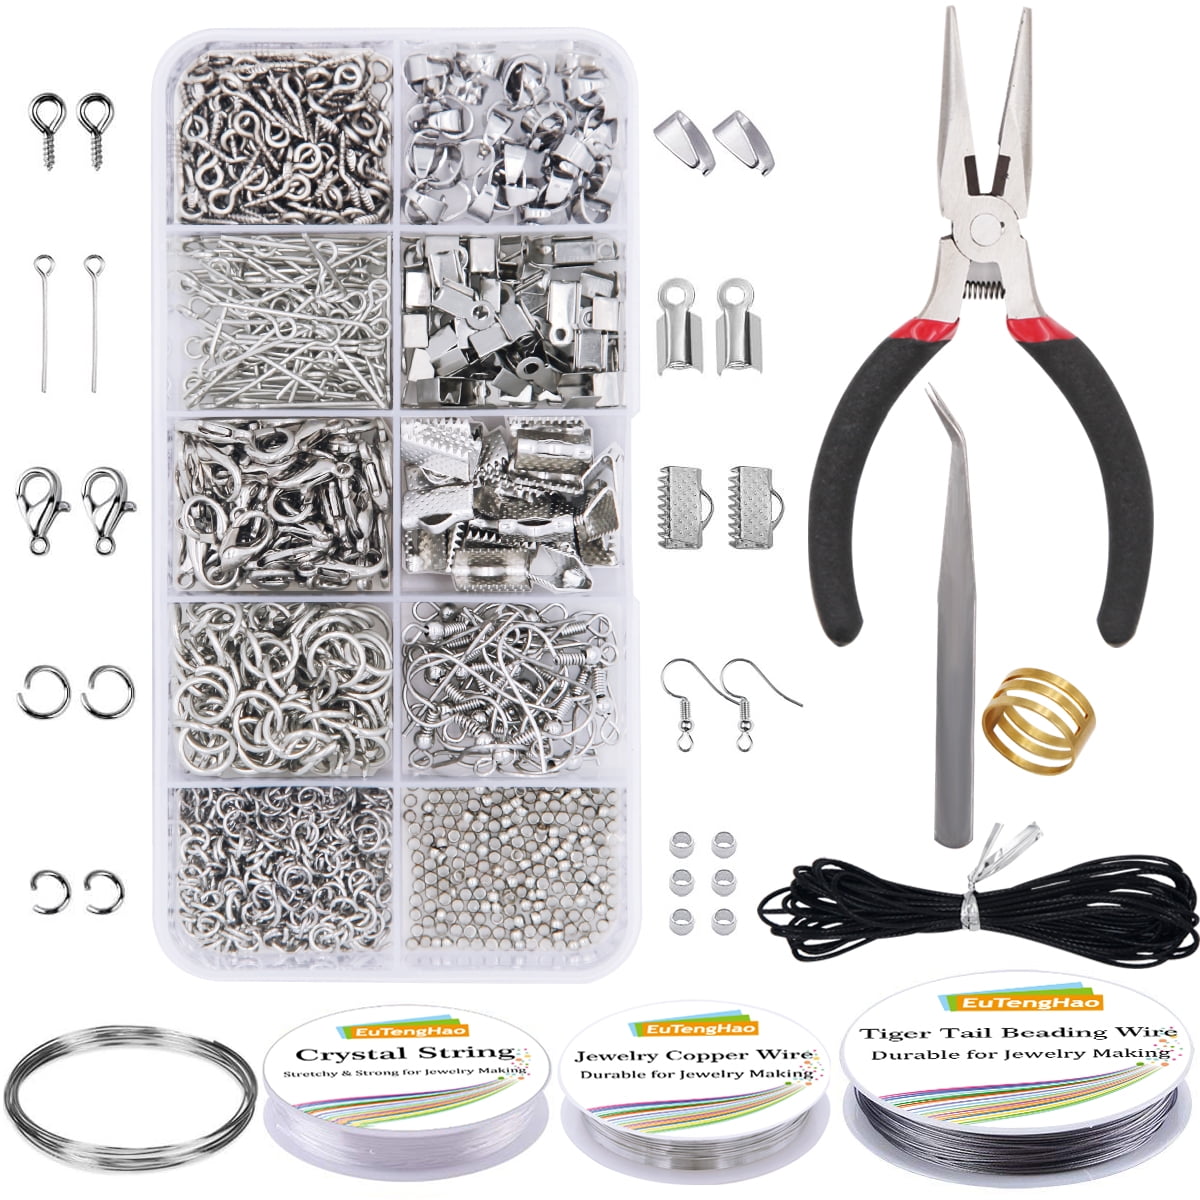 Jewelry Making Supplies Kit with Jewelry Tools, Jewelry Copper